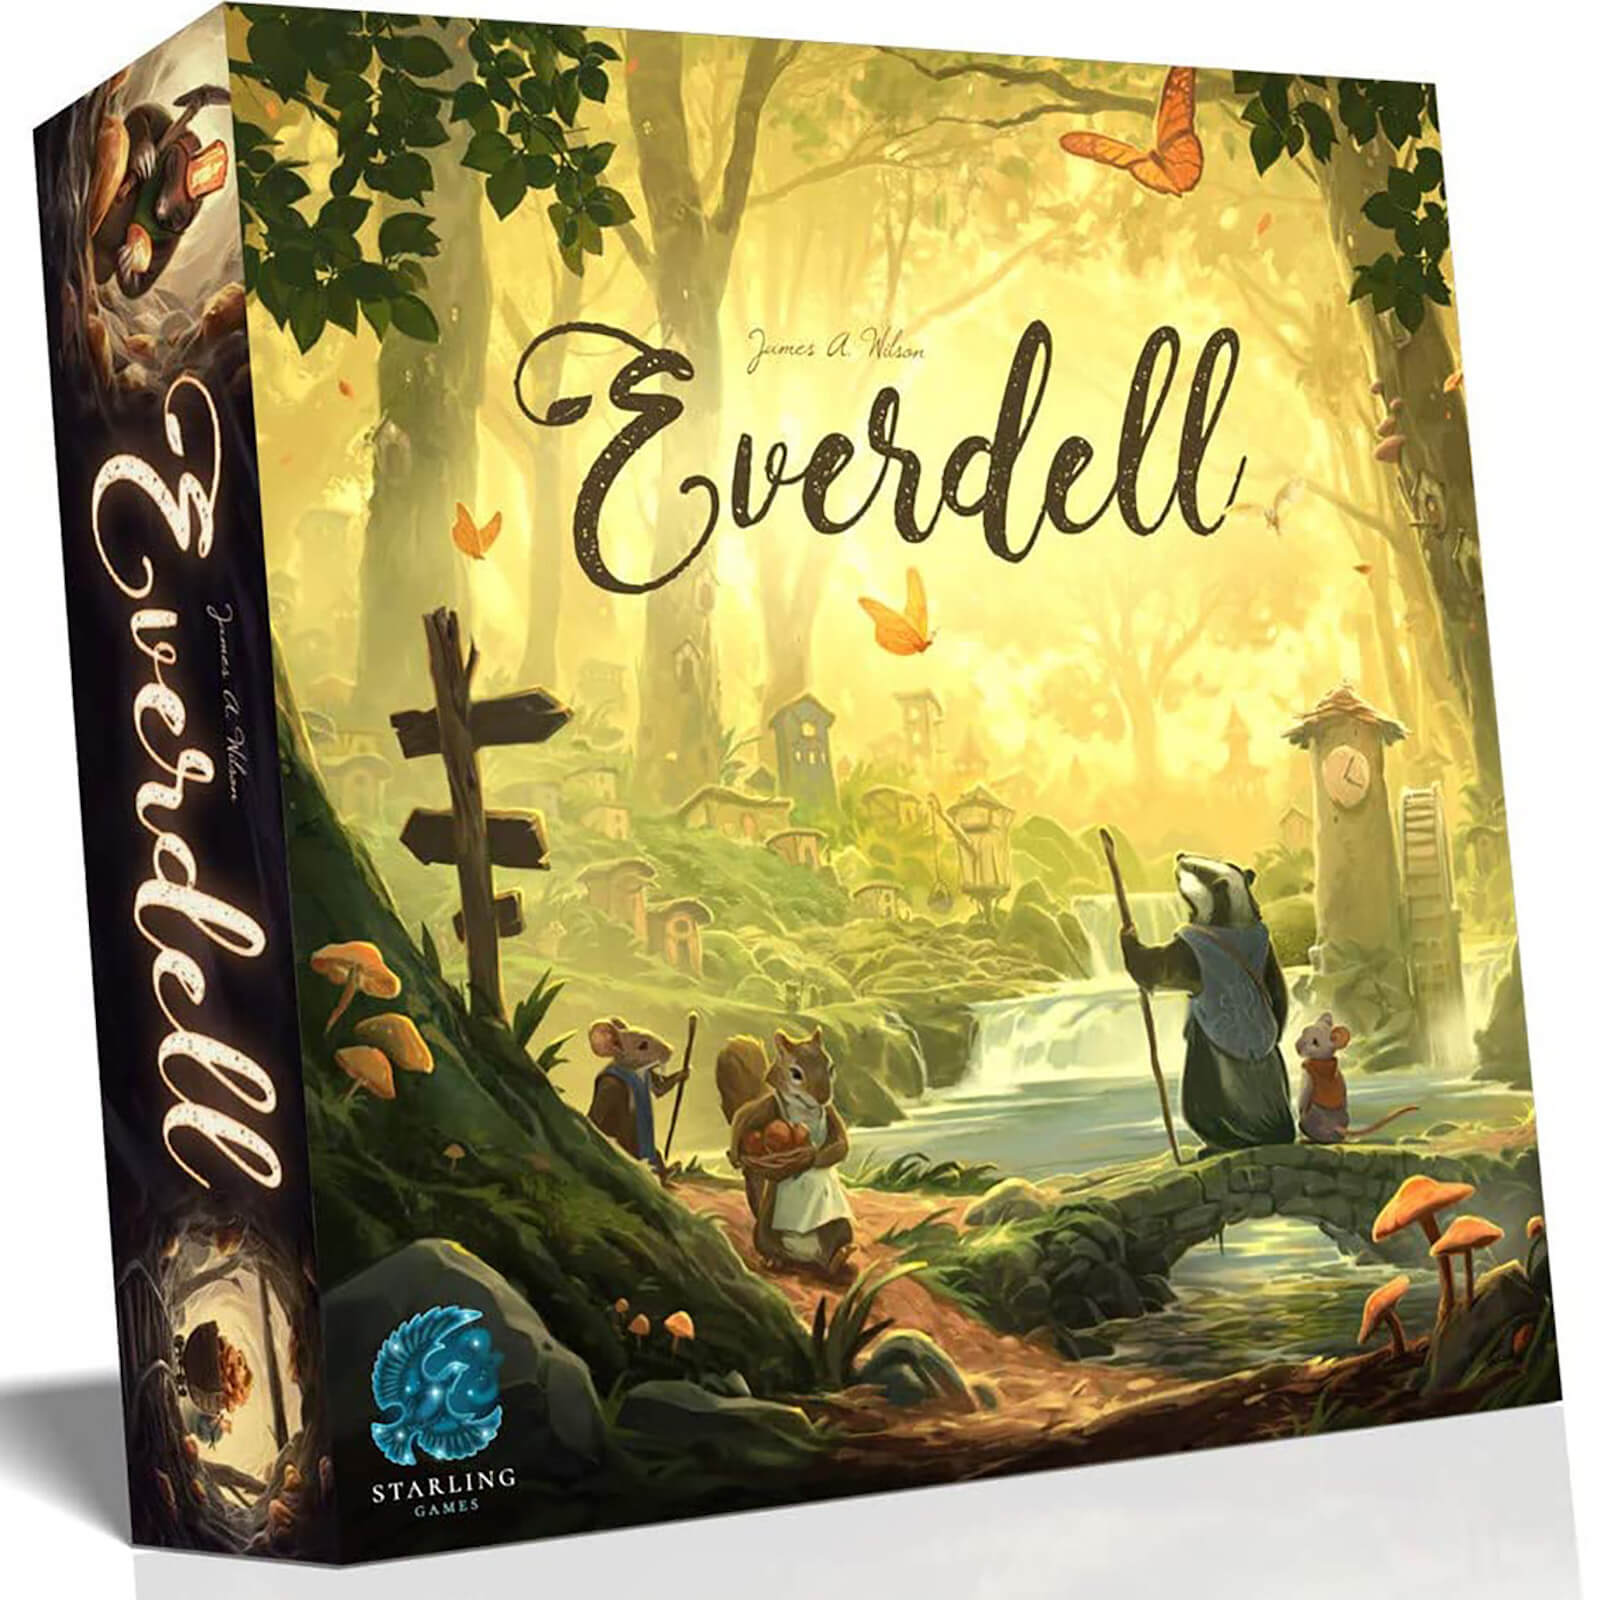 Everdell Board Game